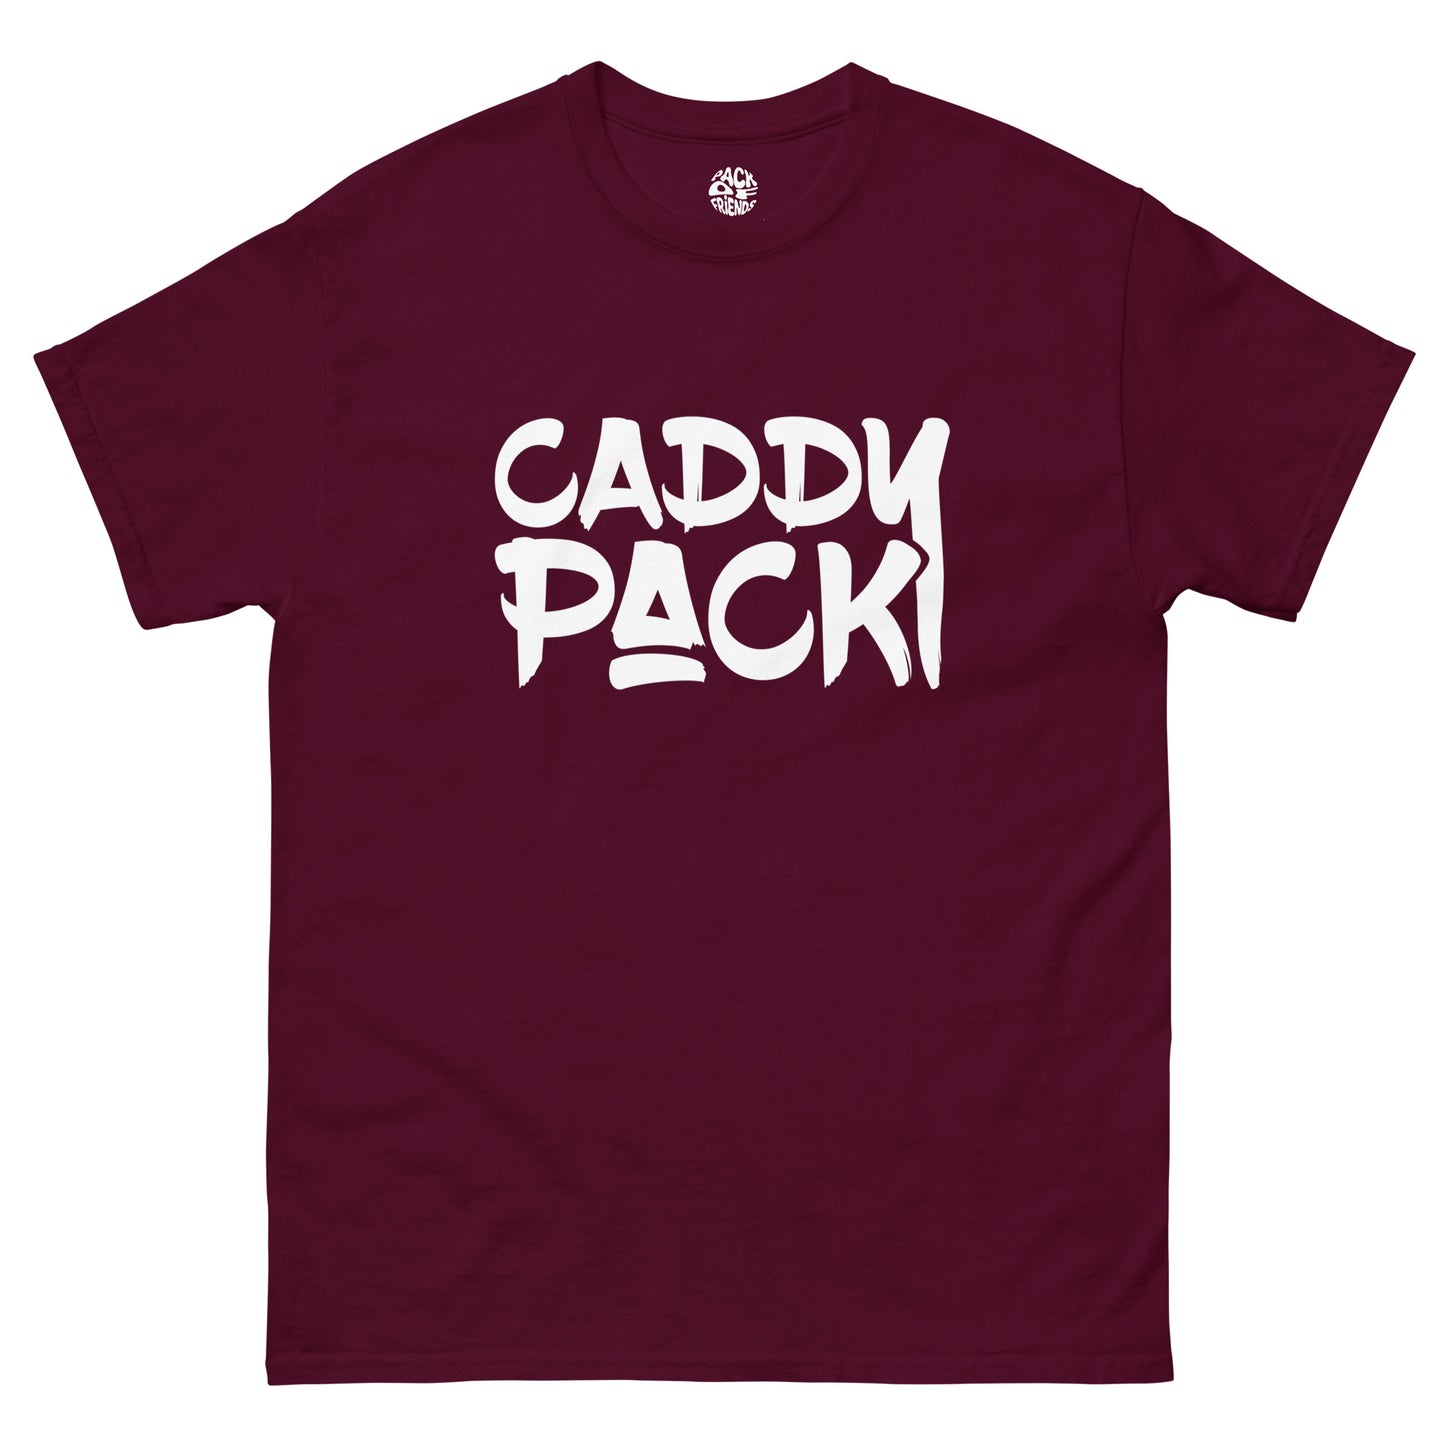 Caddy Pack "Day 1" T-Shirt